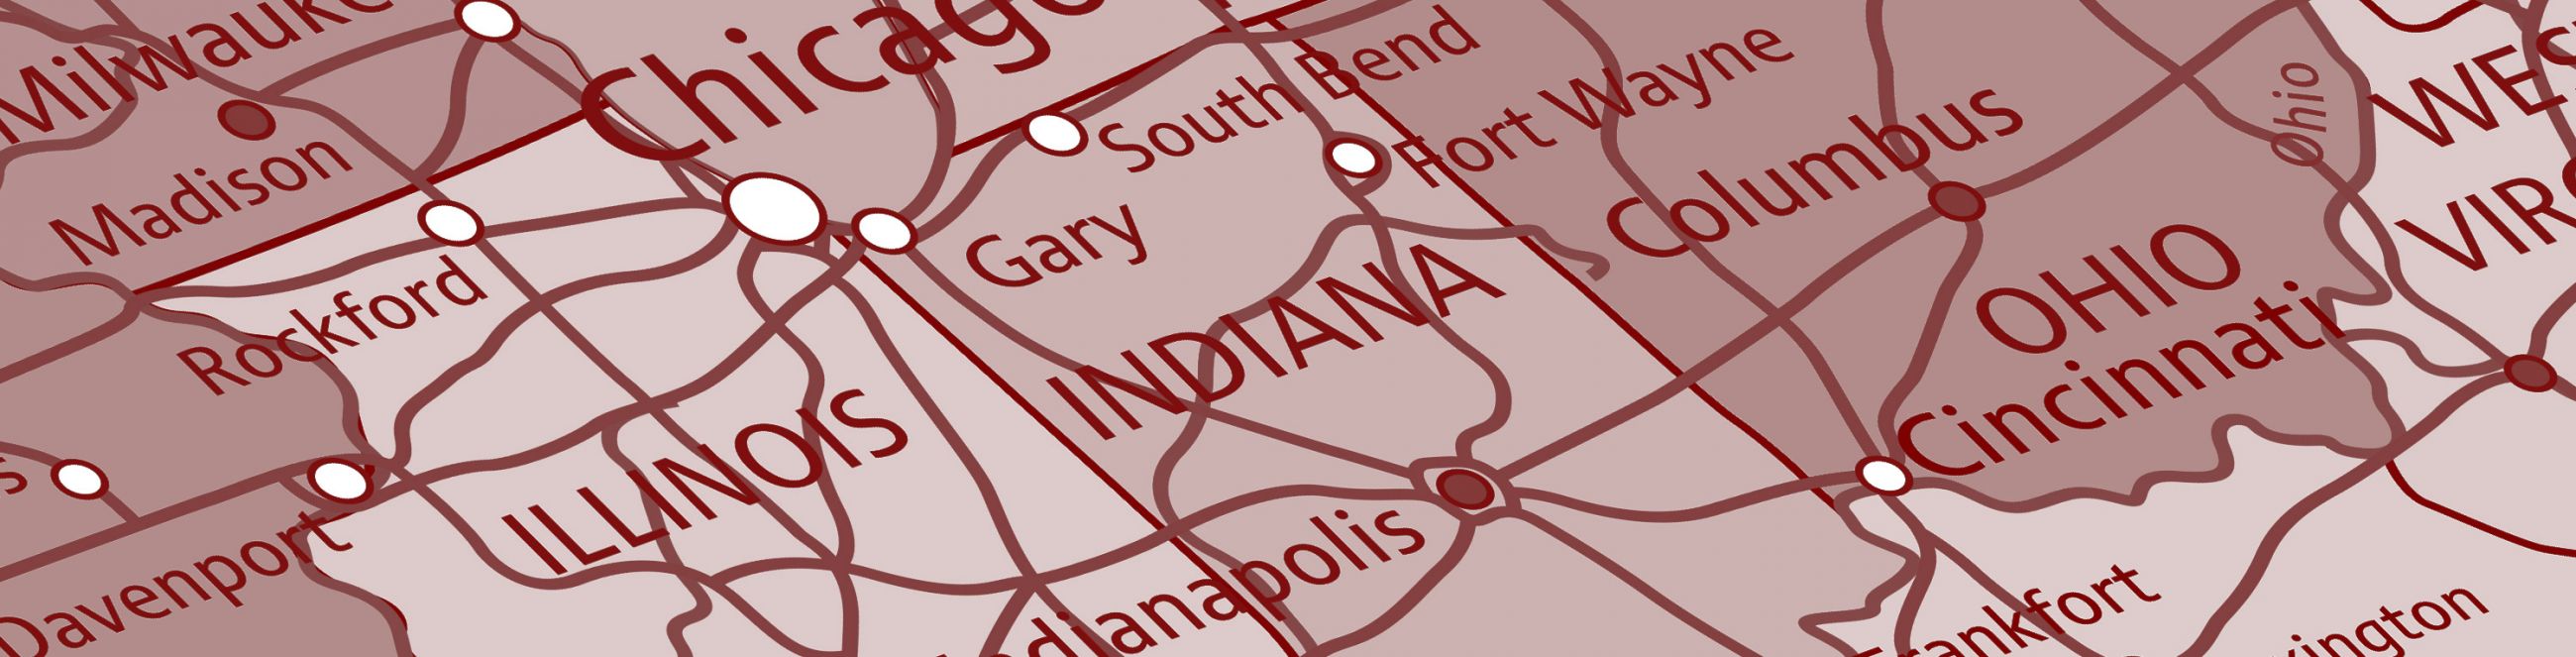 Delta 8 Indiana Facts & Is Delta 8 Legal In Indiana?